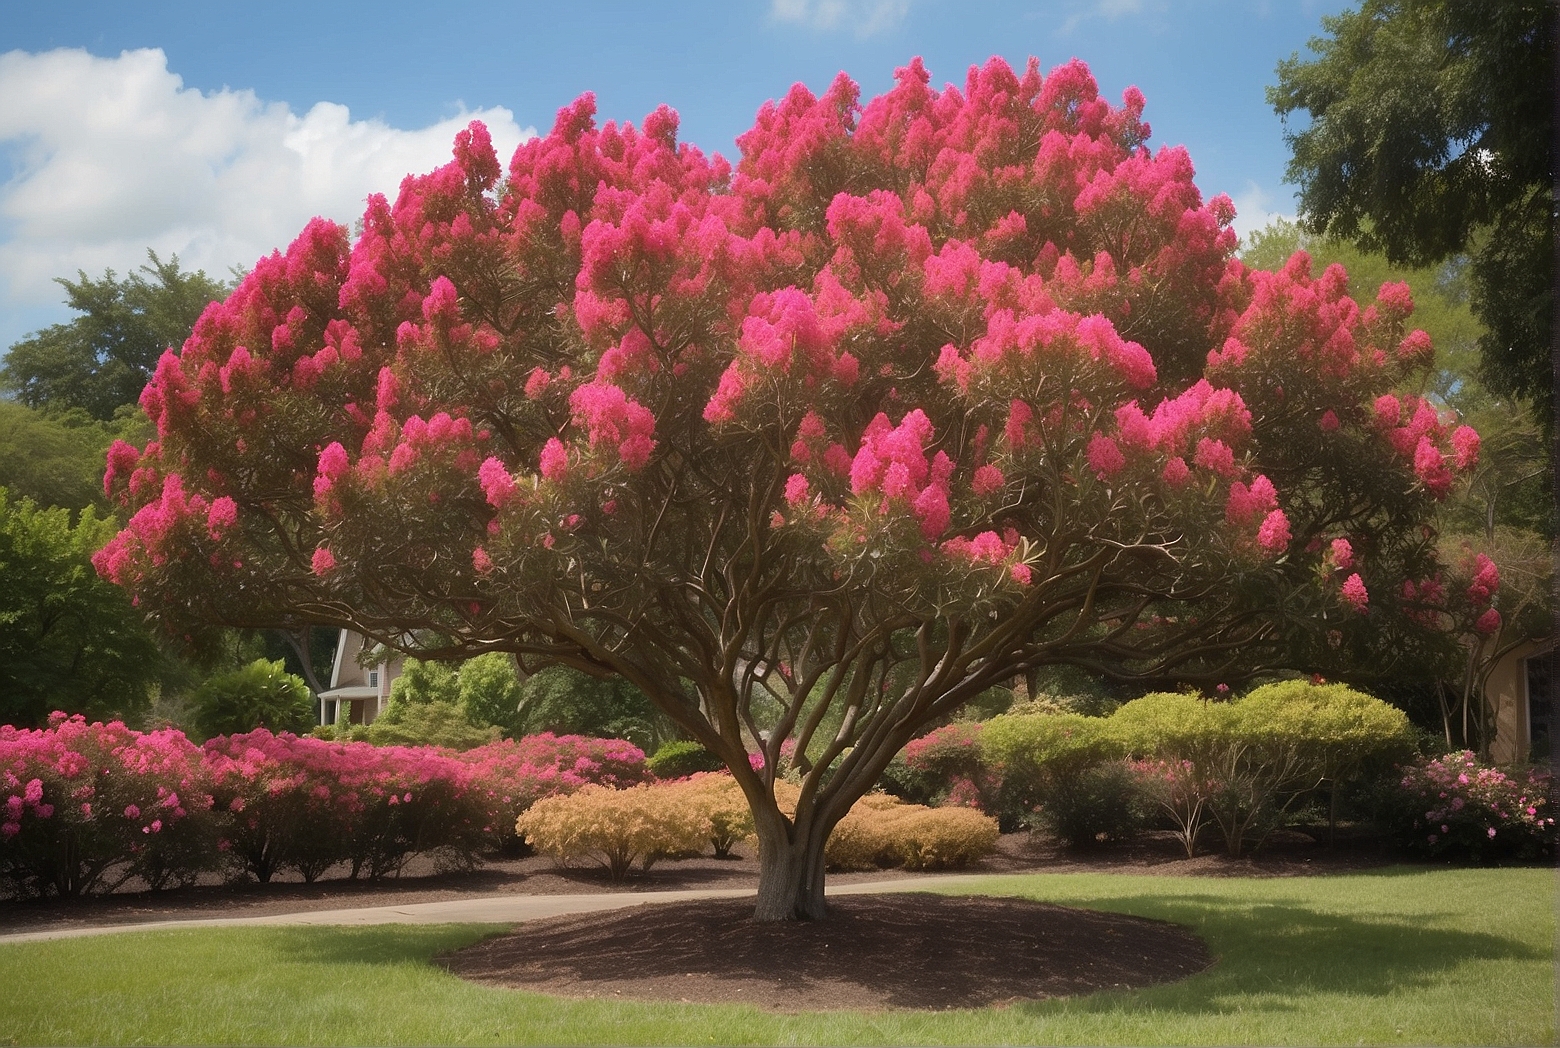 Is a Crepe Myrtle a Tree or a Bush